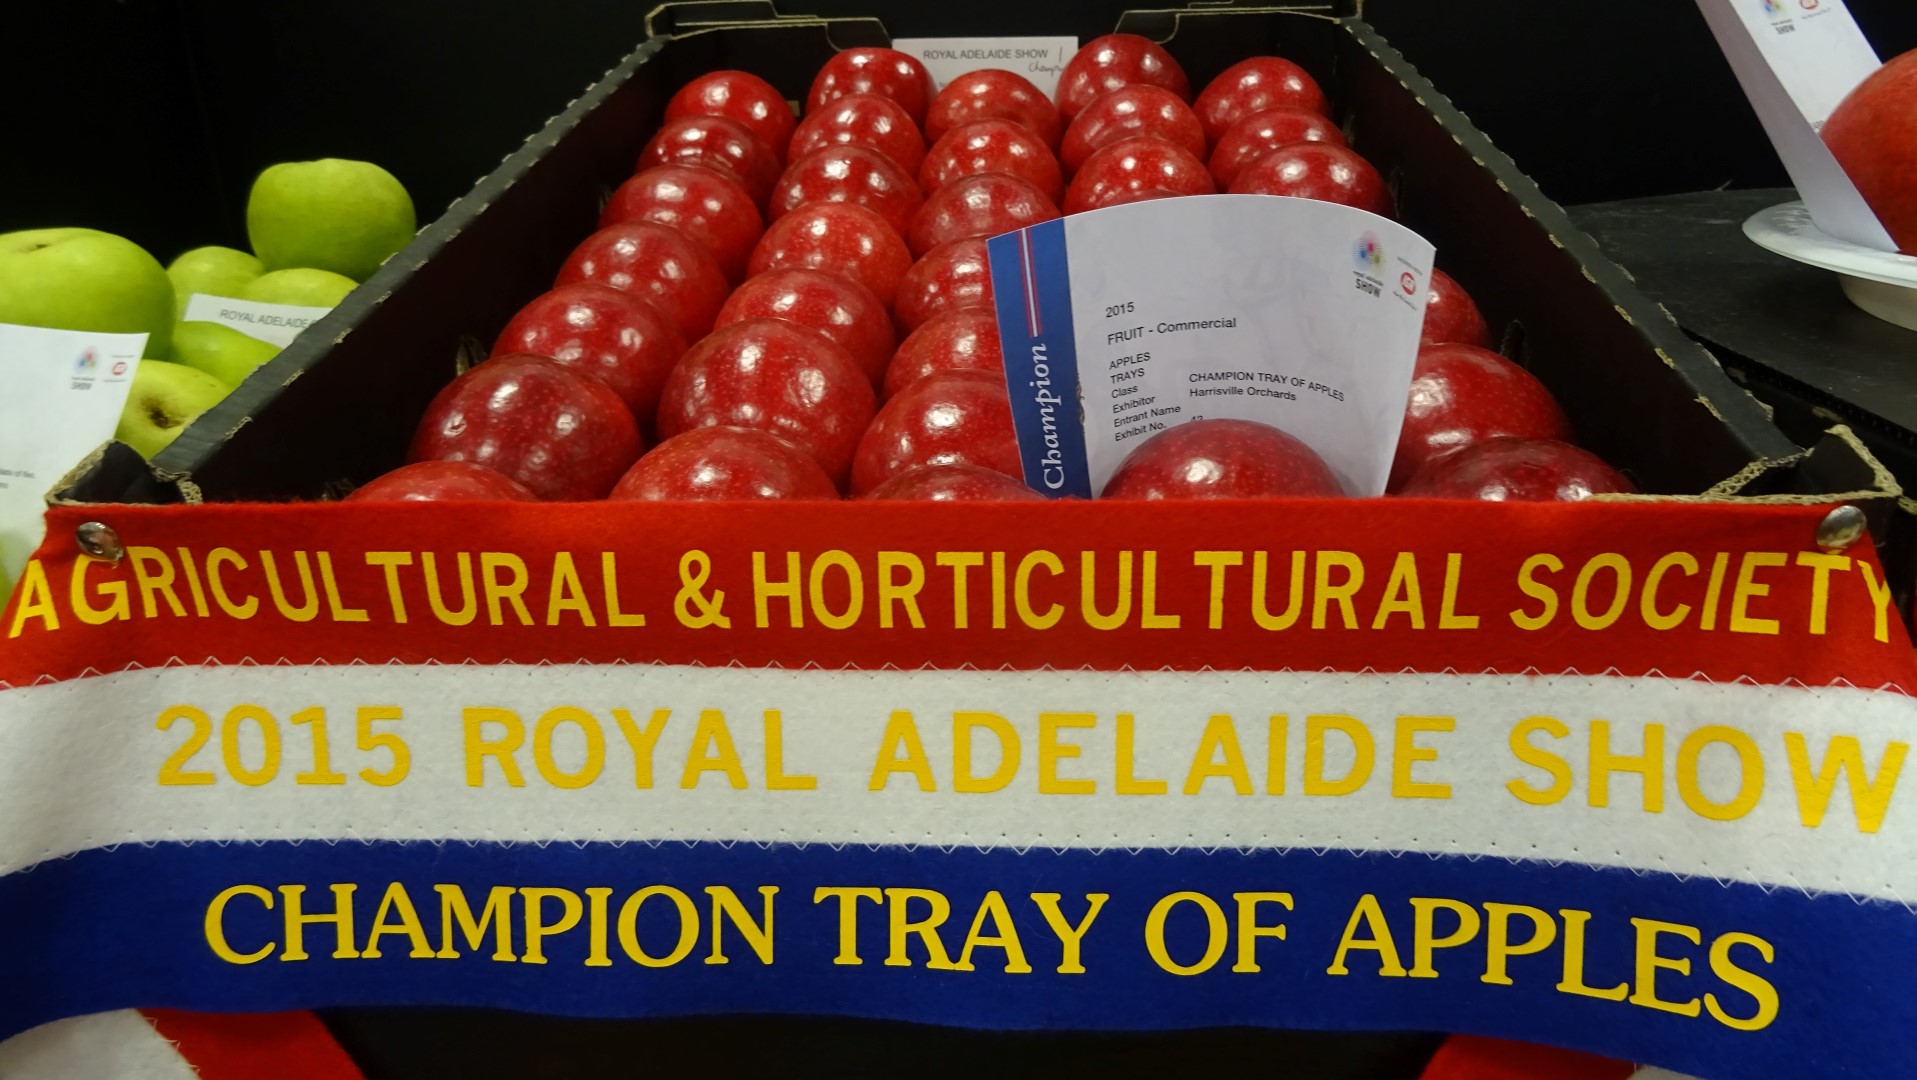 Champion Tray of Apples. Royal Adelaide Show 2015